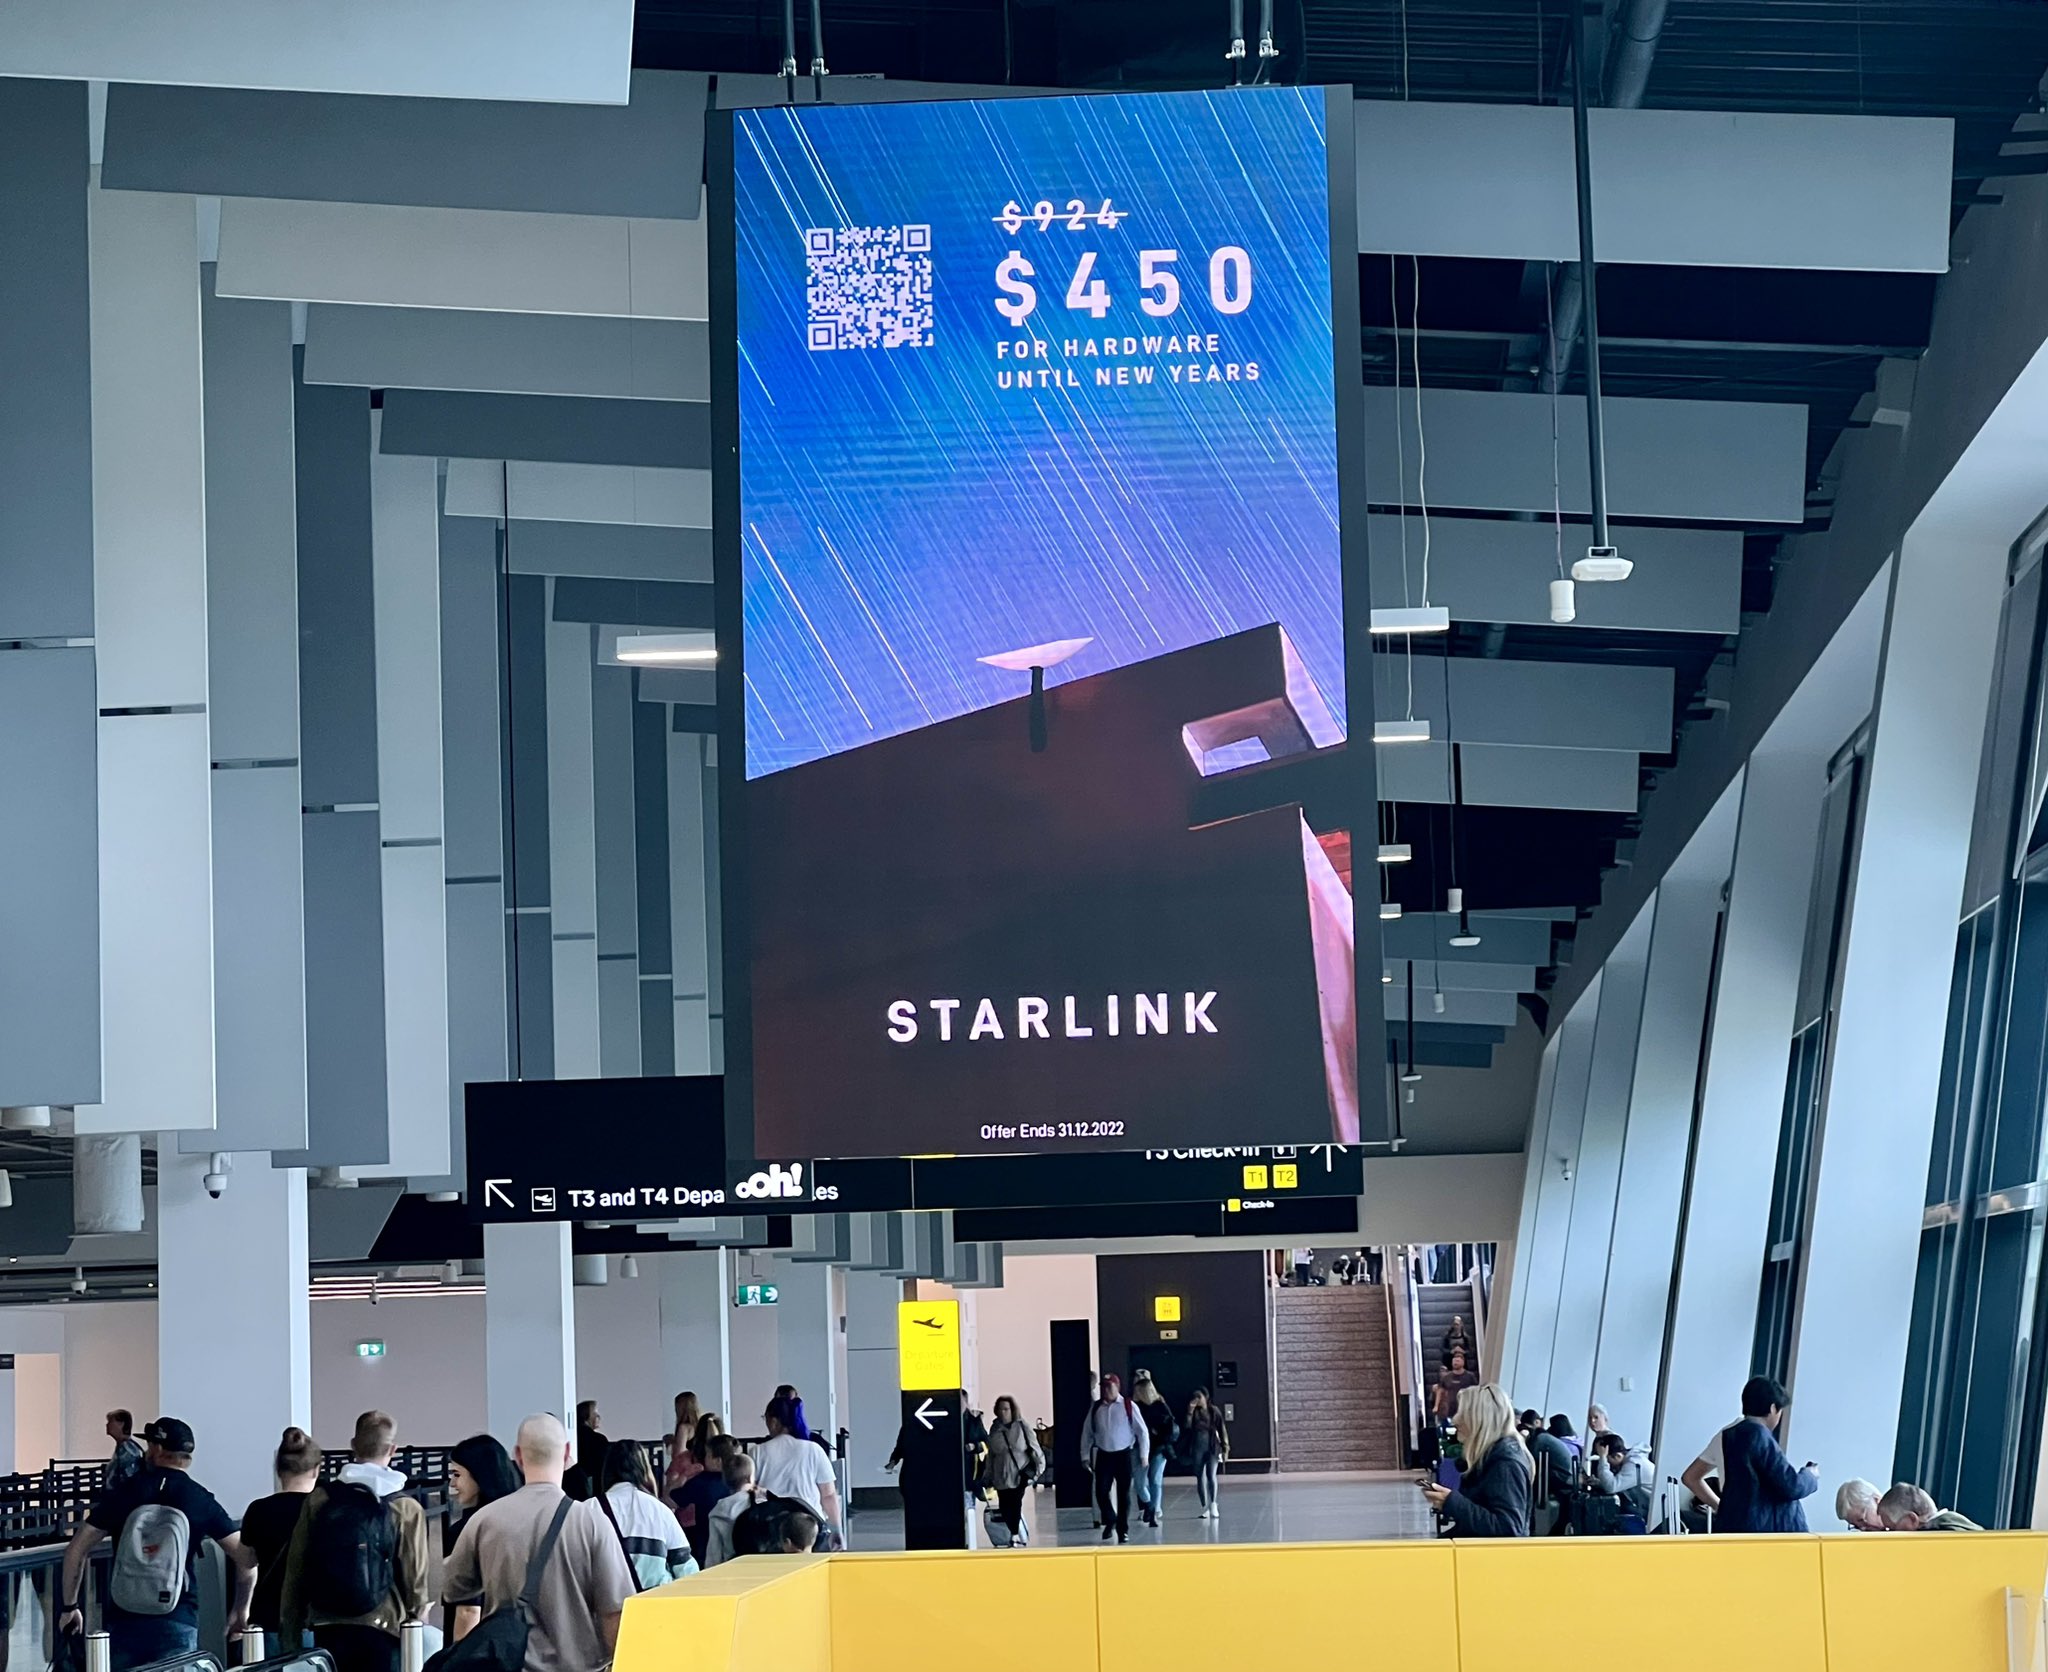 SpaceX displays Starlink discount advertisement at an Airport in Australia